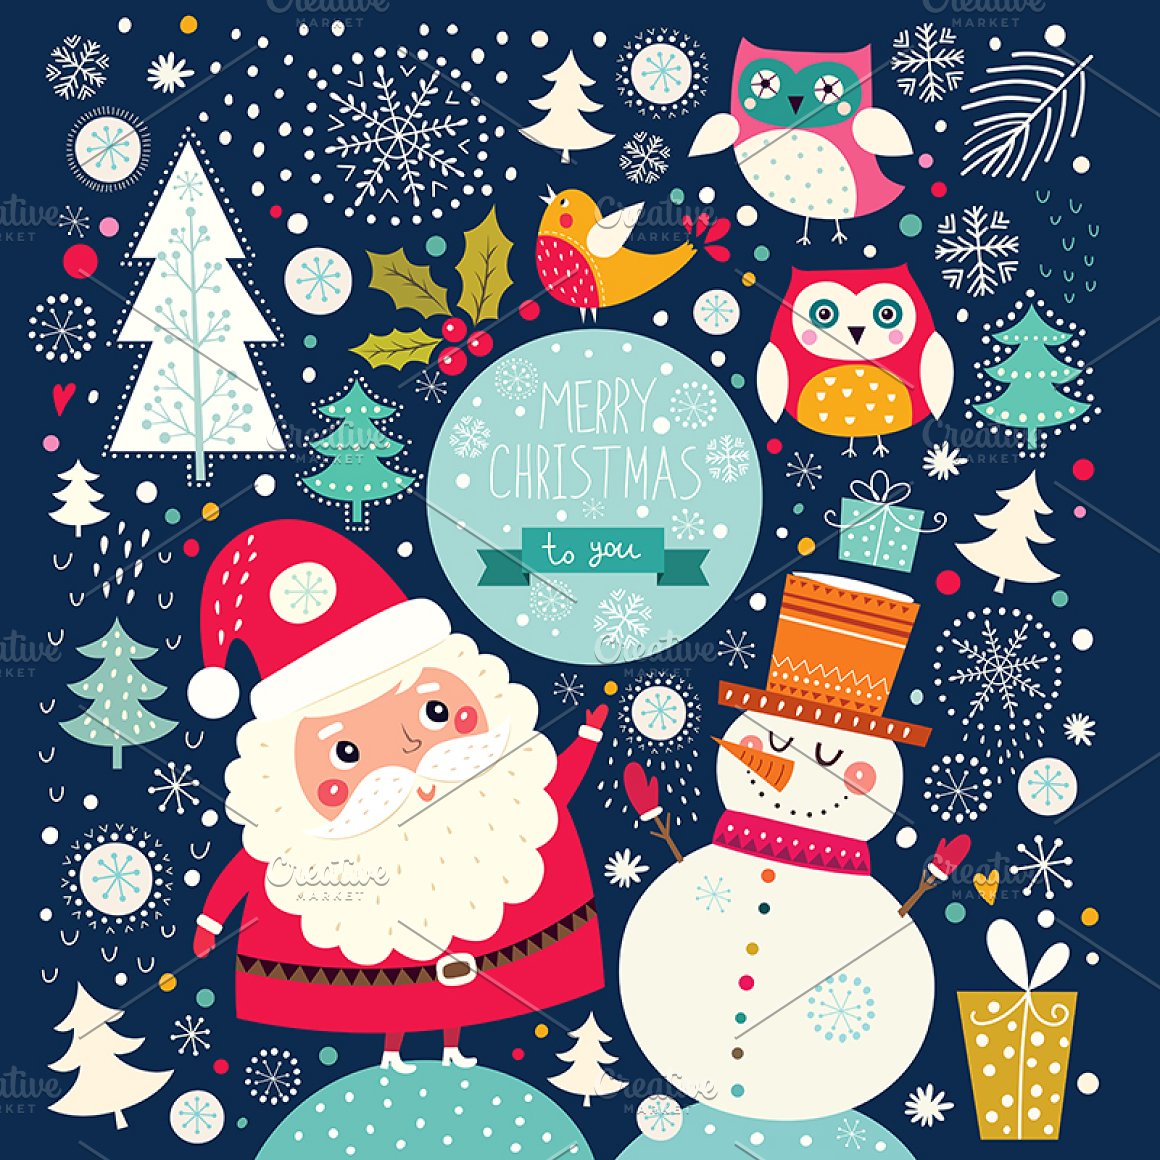 Dark blue background with small winter elements and Santa with a snowman.